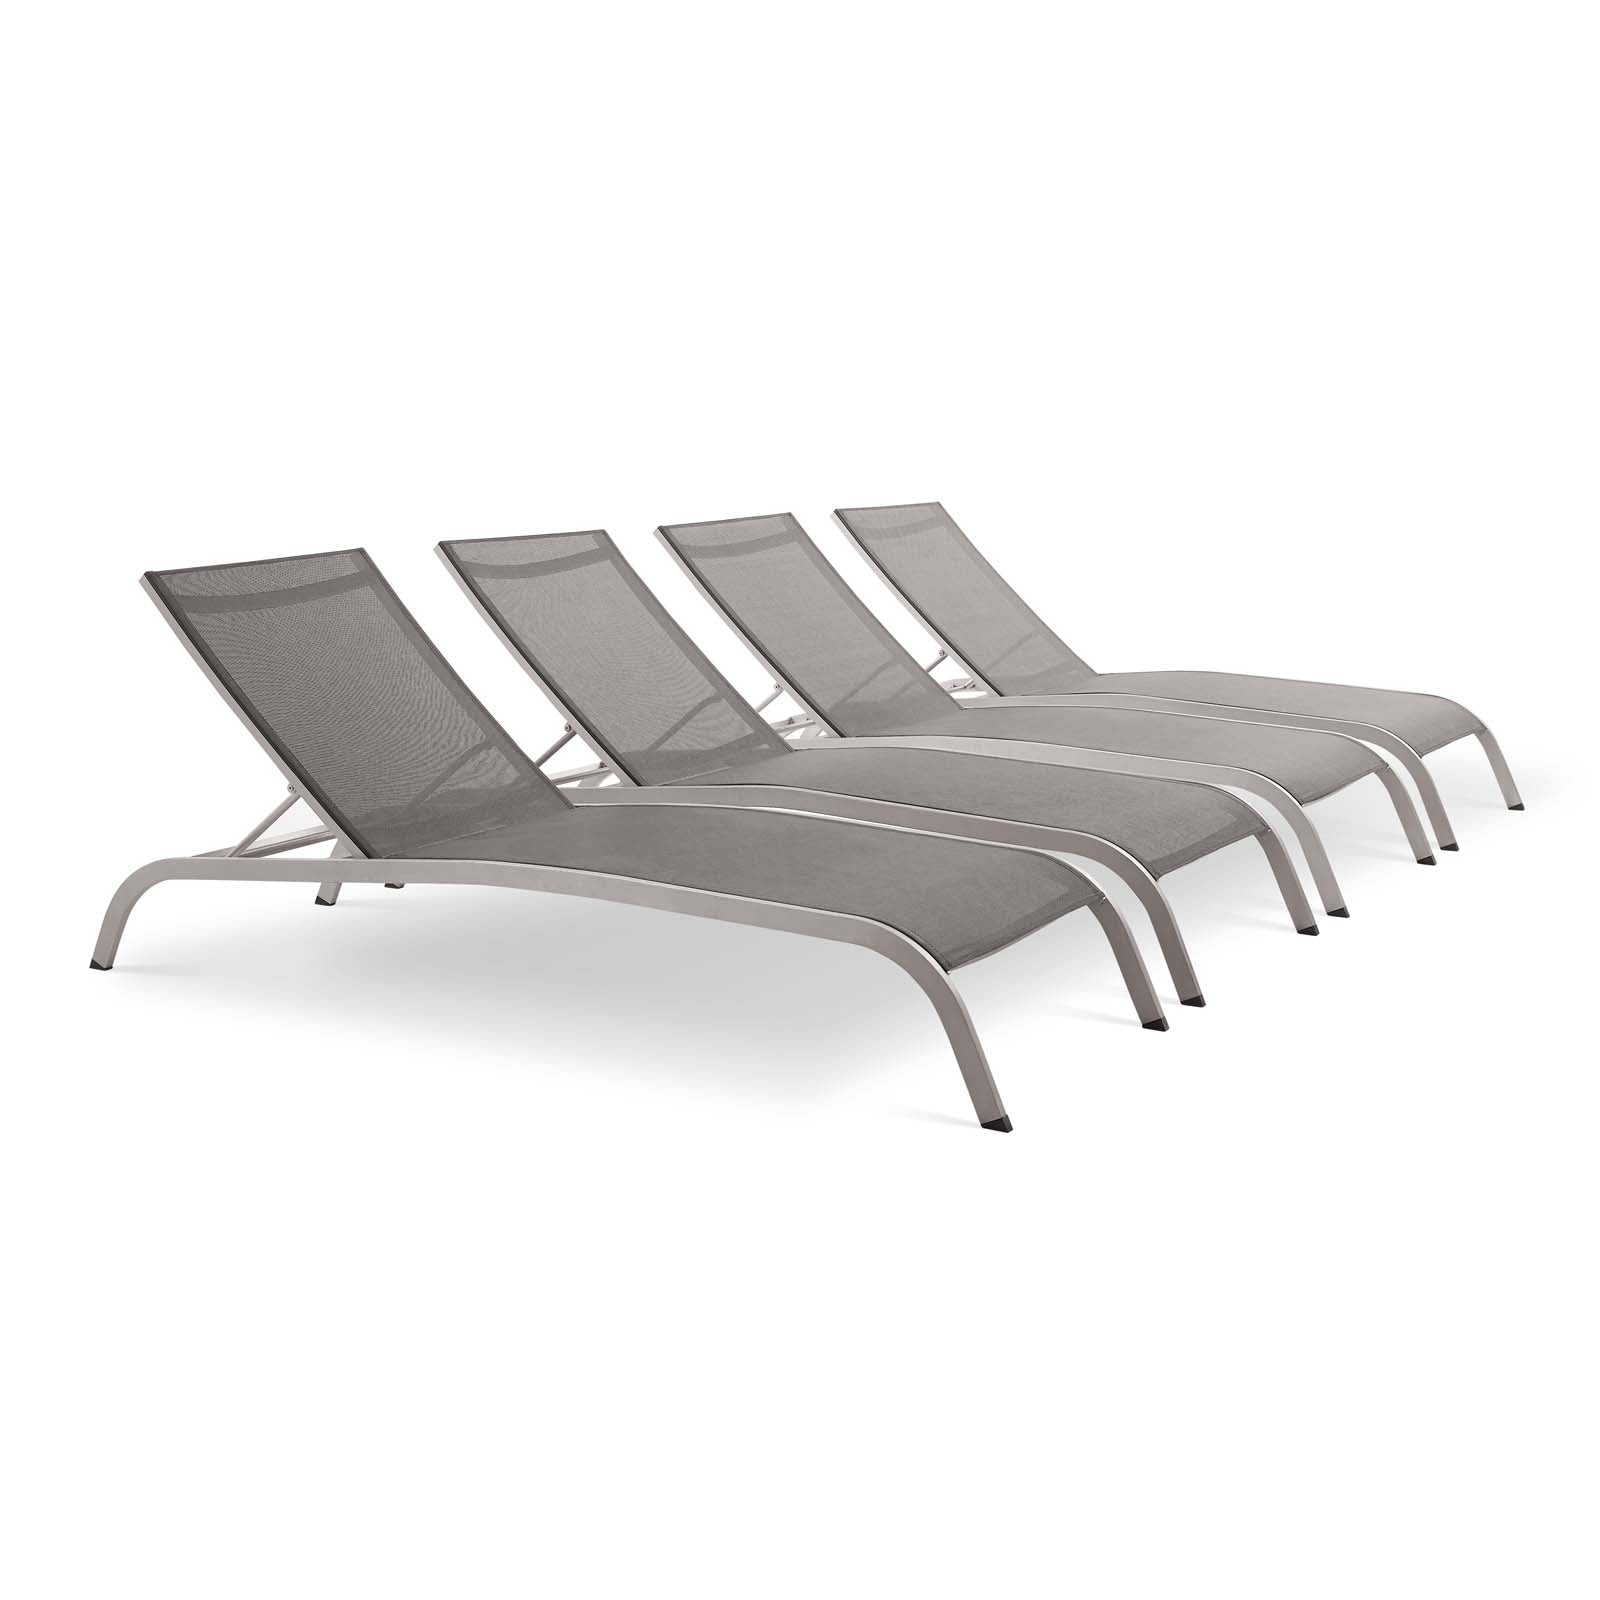 Savannah Outdoor Patio Mesh Chaise Lounge Set of 4-Outdoor Set-Modway-Wall2Wall Furnishings